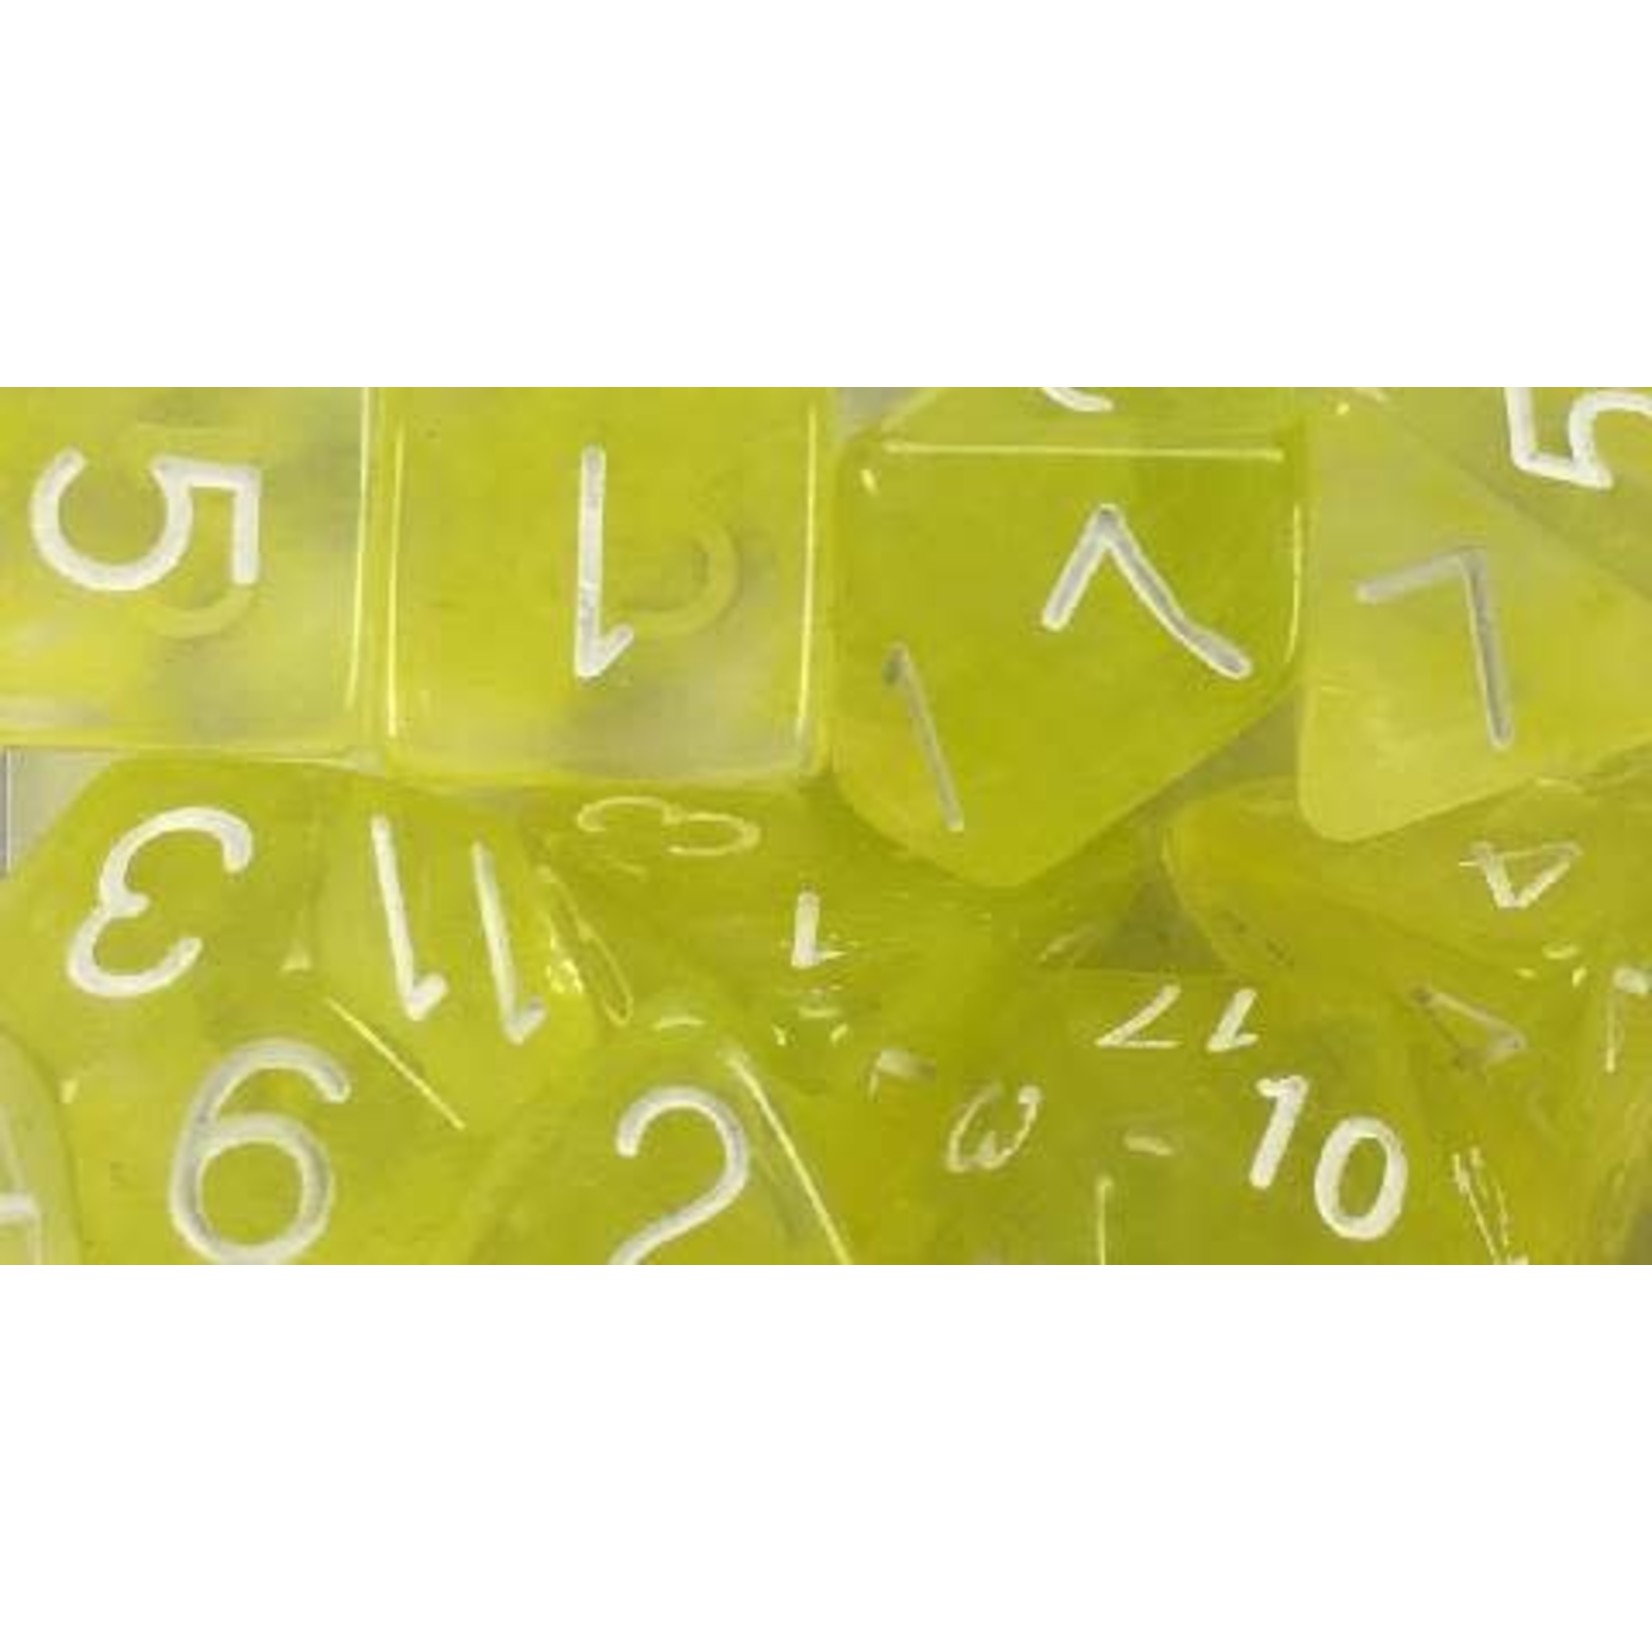 Roll 4 Initiative Polyhedral Dice: Diffusion Ochre Jelly White- Set of 7